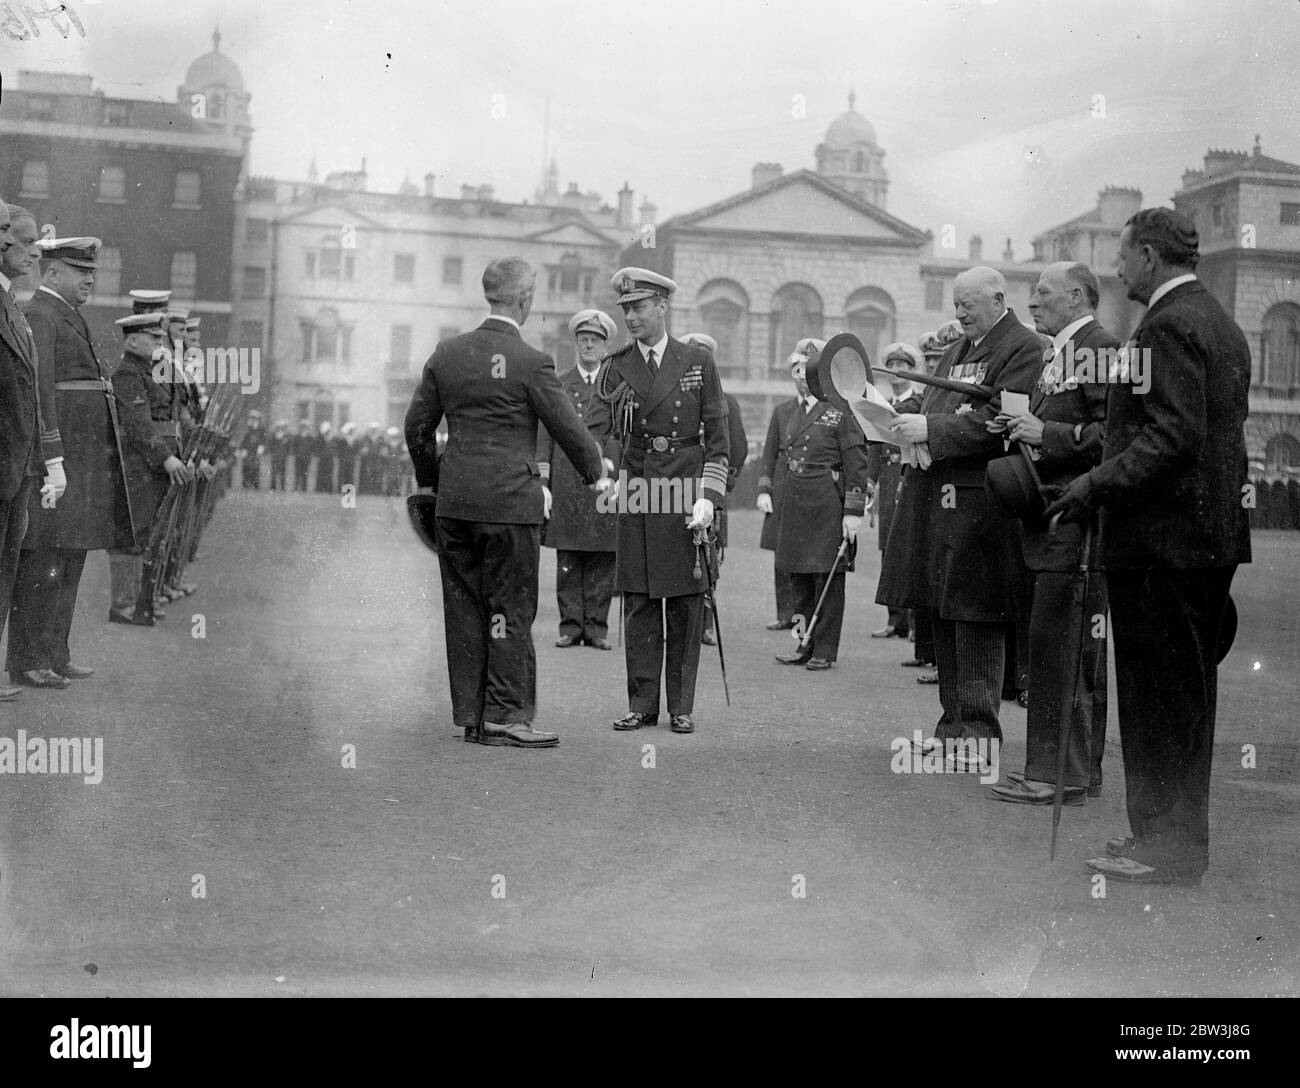 Duke of York inspects Royal Naval Volunteer Reserve Association on Horse Guards . The Duke of York , as an Admiral , inspected members of the Royal Naval Volunteer Reserve Association on the Horse Guards Parade , Whitehall . Photo shows , Veterans being presented to the Duke of York . 9 May 1936 Stock Photo